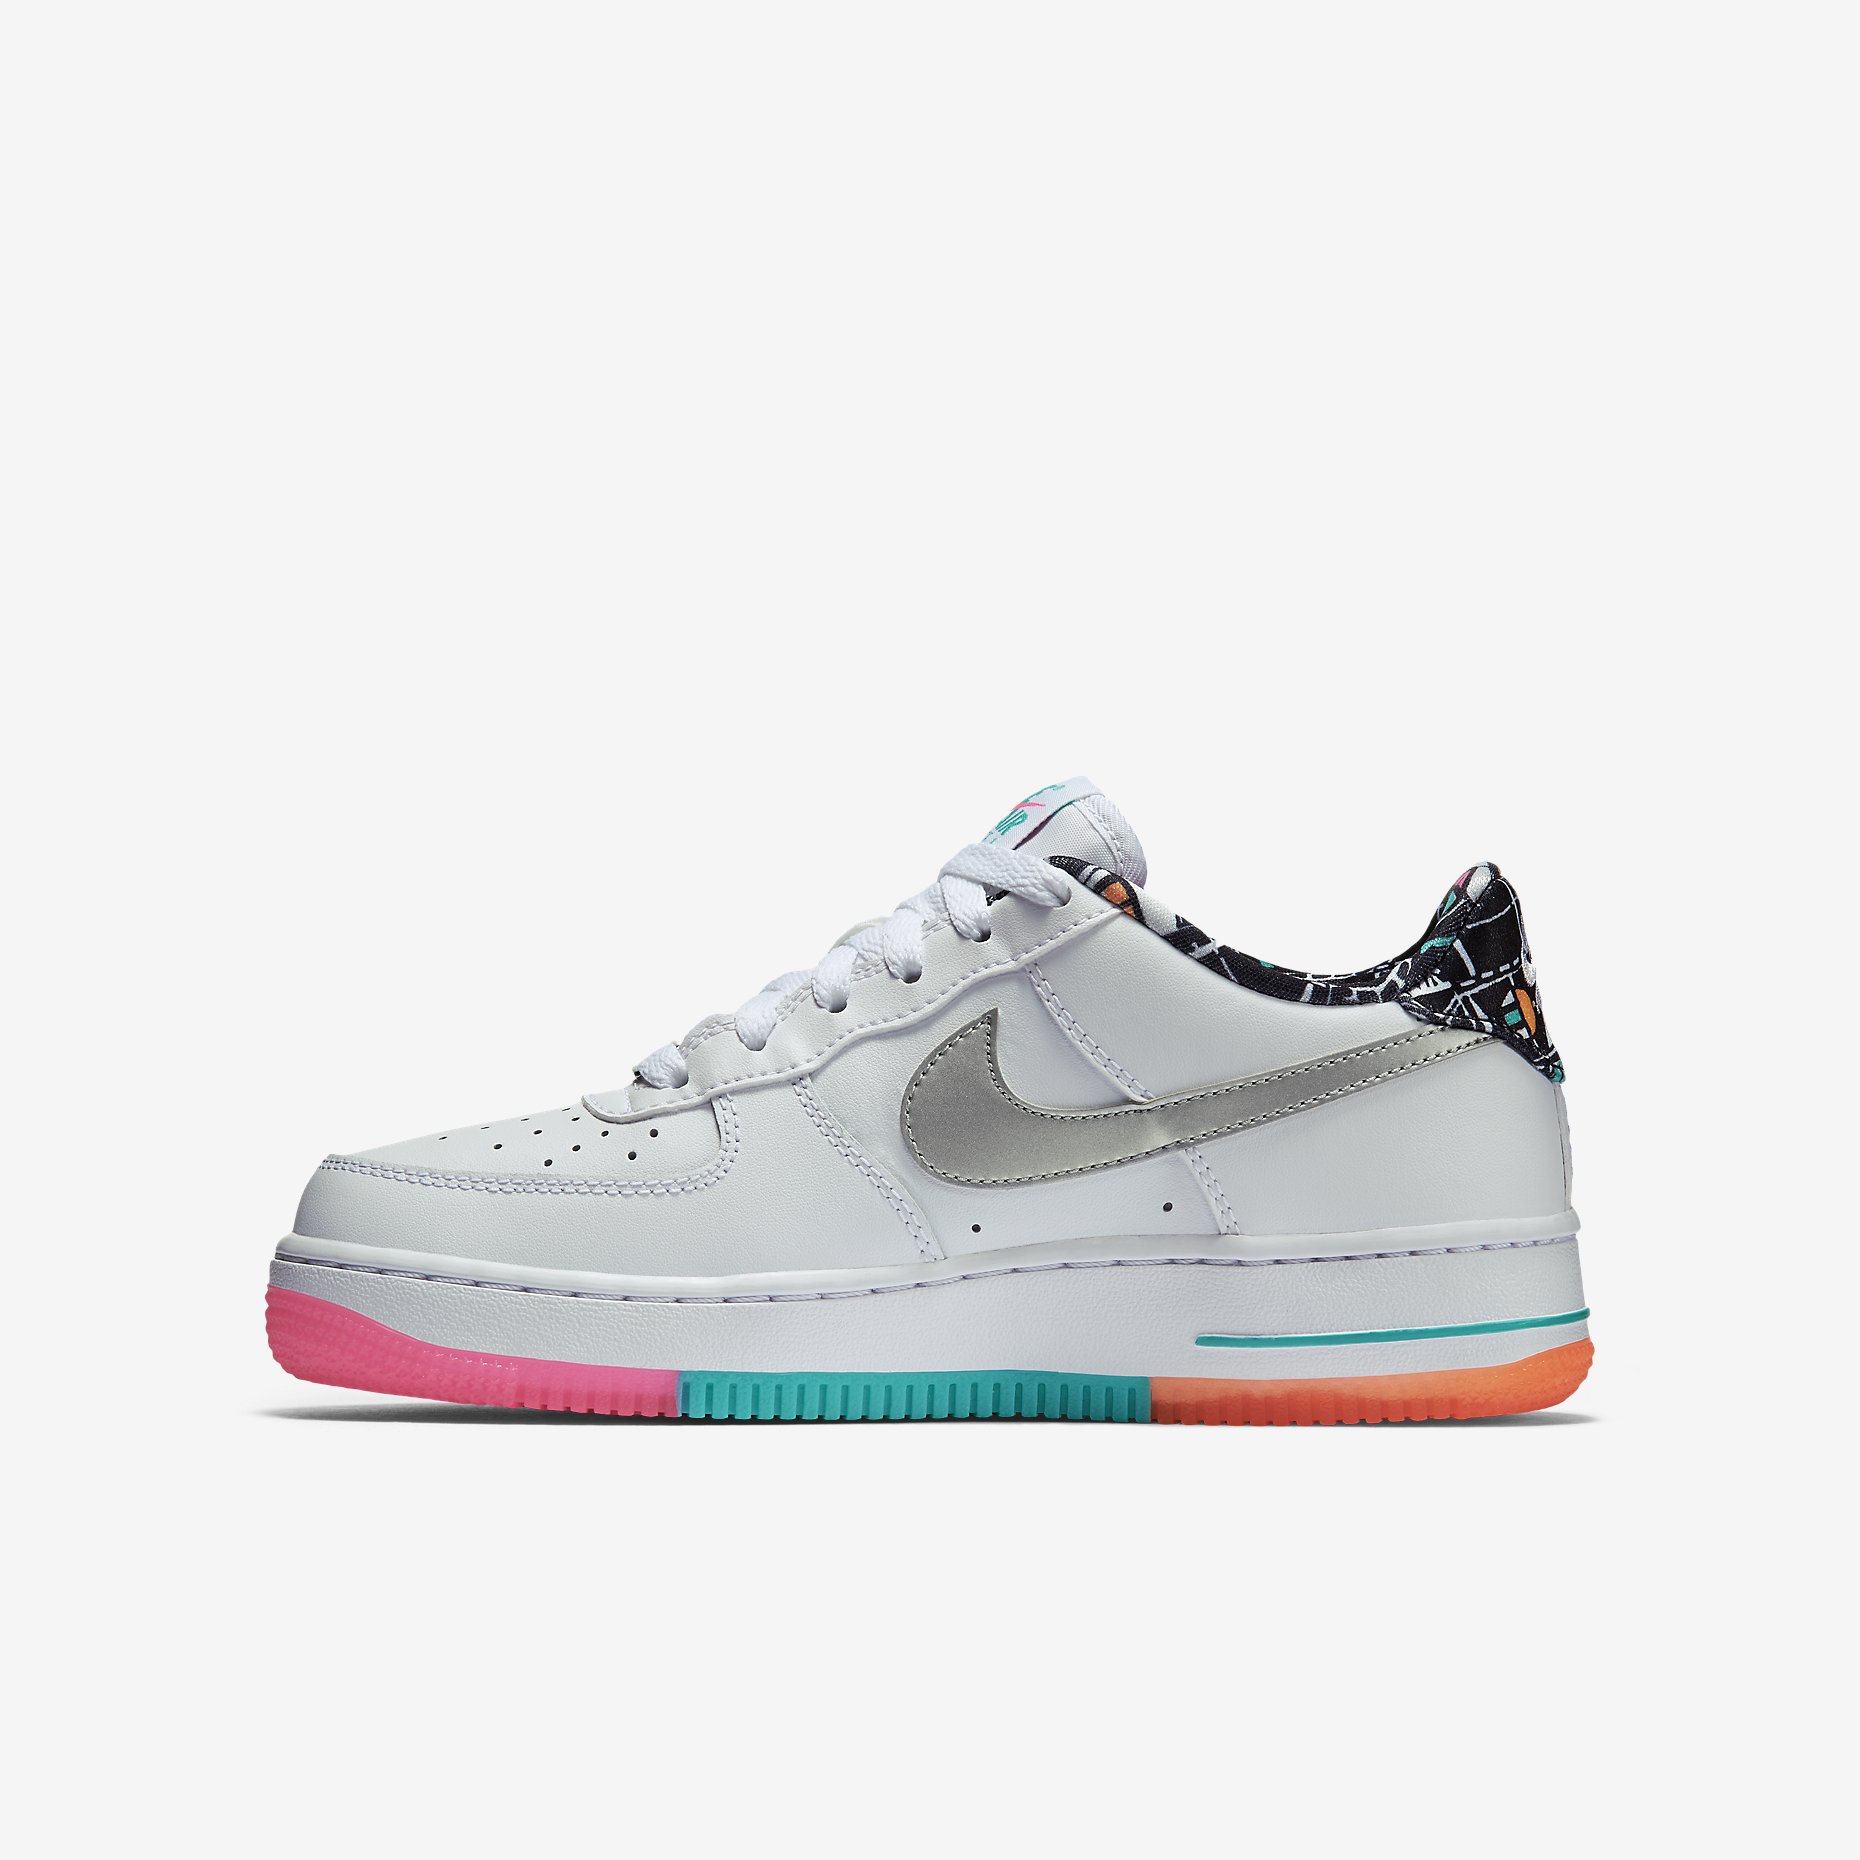 size 5.5 air force 1